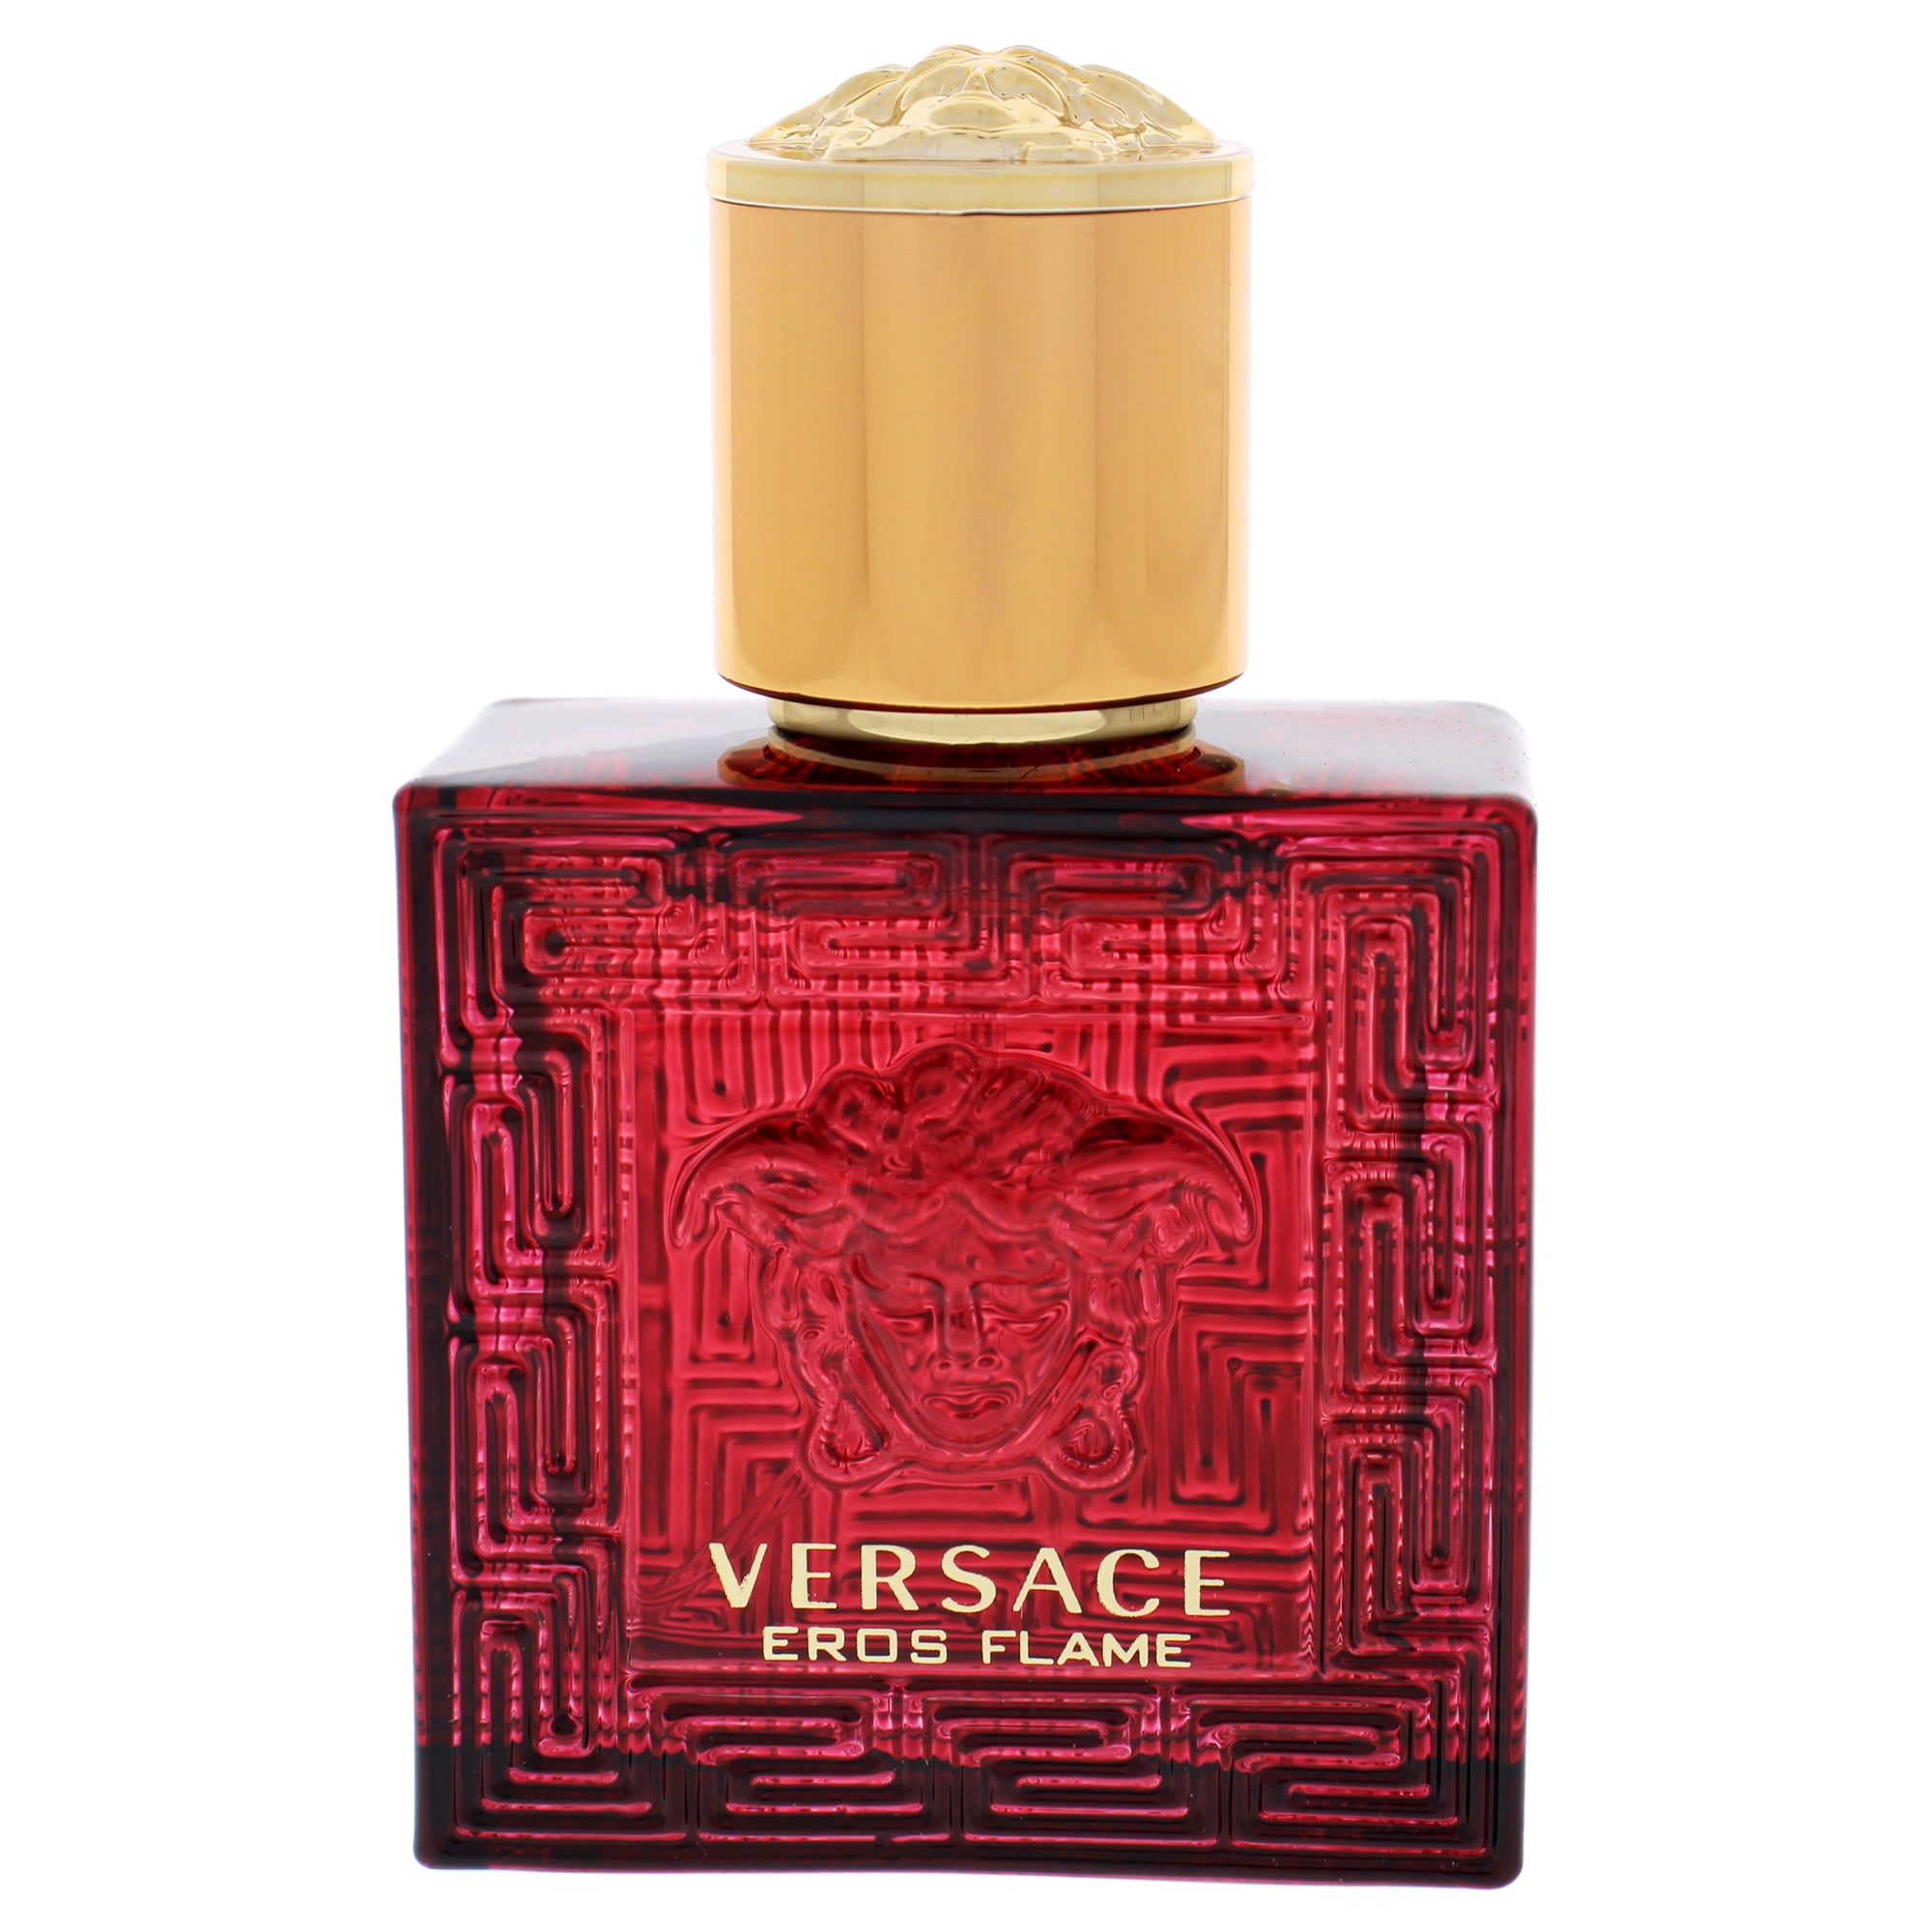 versace flame cologne